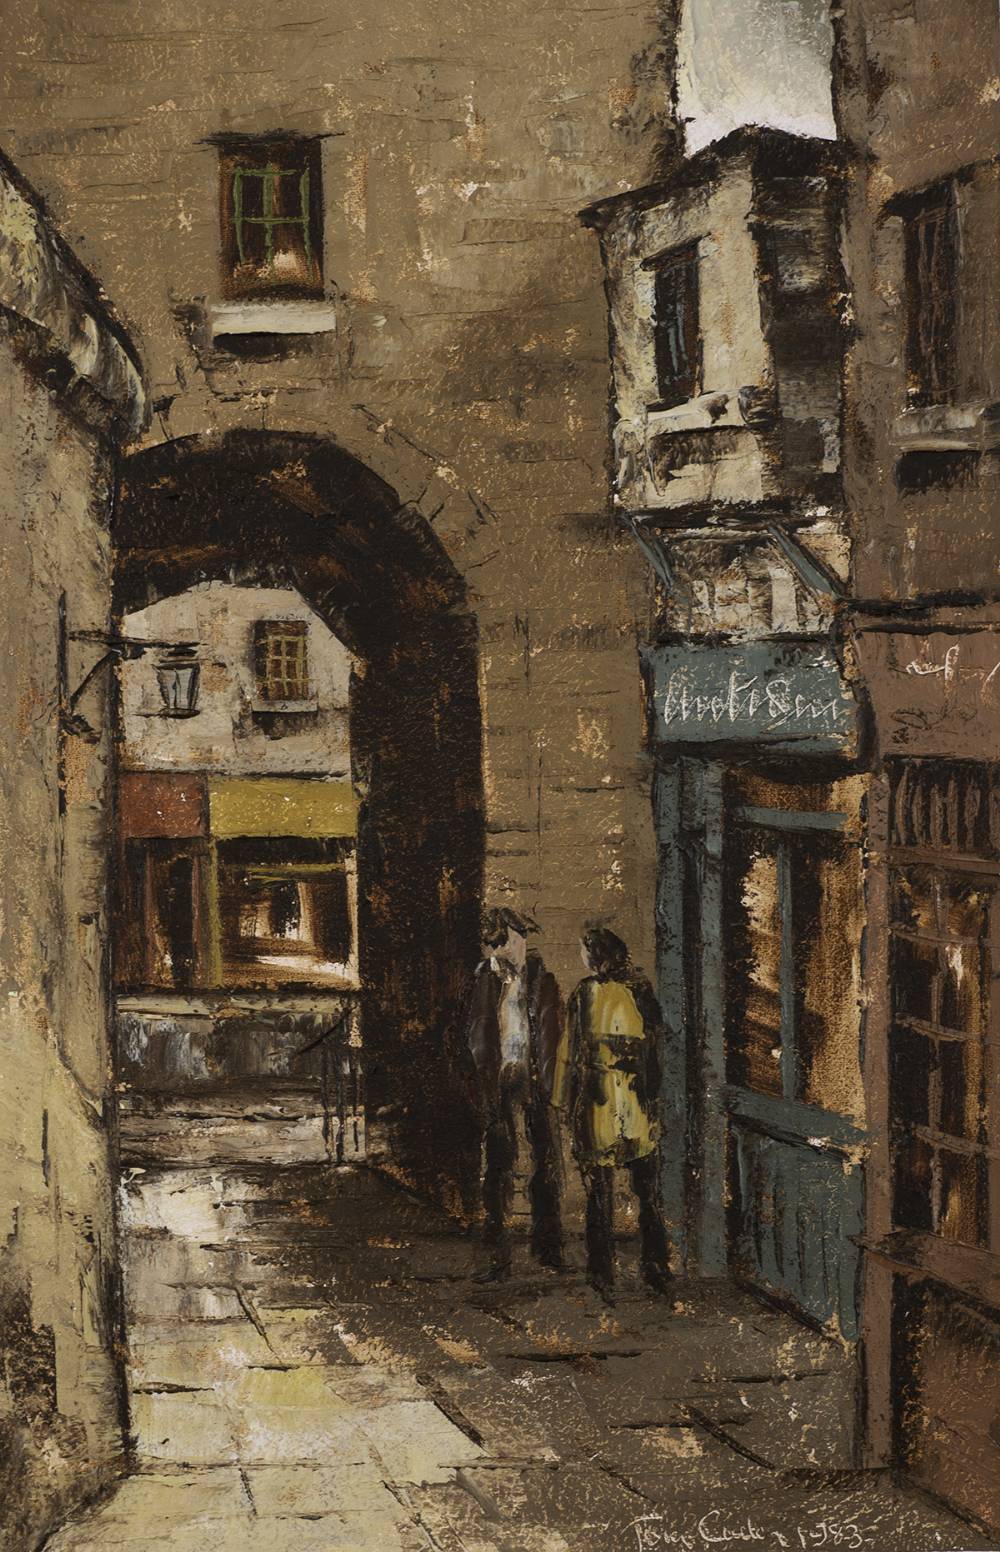 MERCHANT'S ARCH, DUBLIN, 1983 by Tom Cullen sold for 320 at Whyte's Auctions